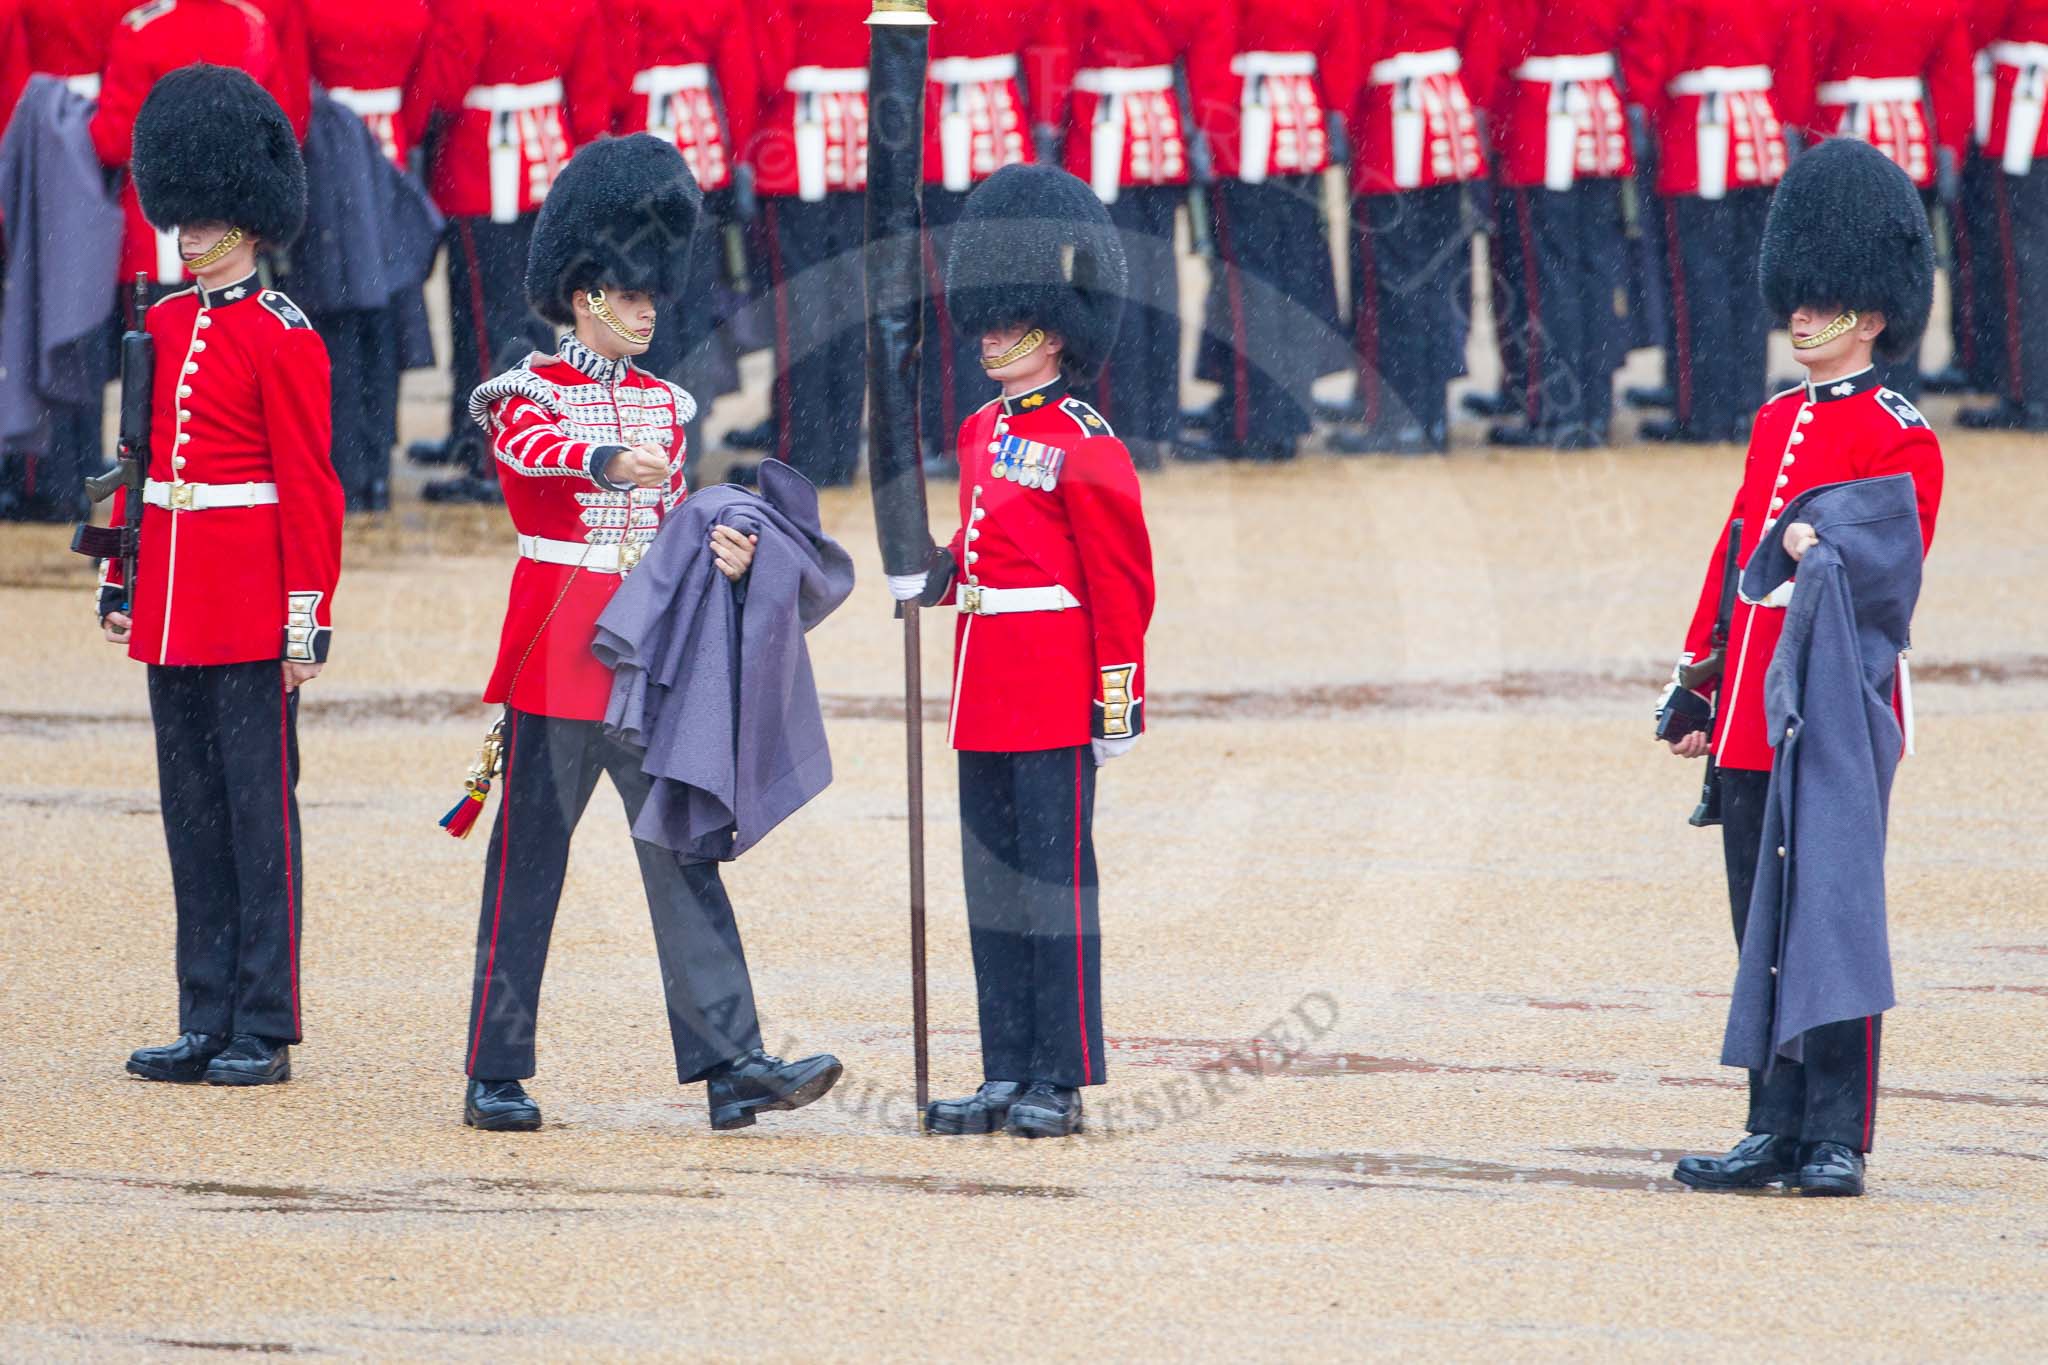 The Colonel's Review 2014.
Horse Guards Parade, Westminster,
London,

United Kingdom,
on 07 June 2014 at 10:26, image #119